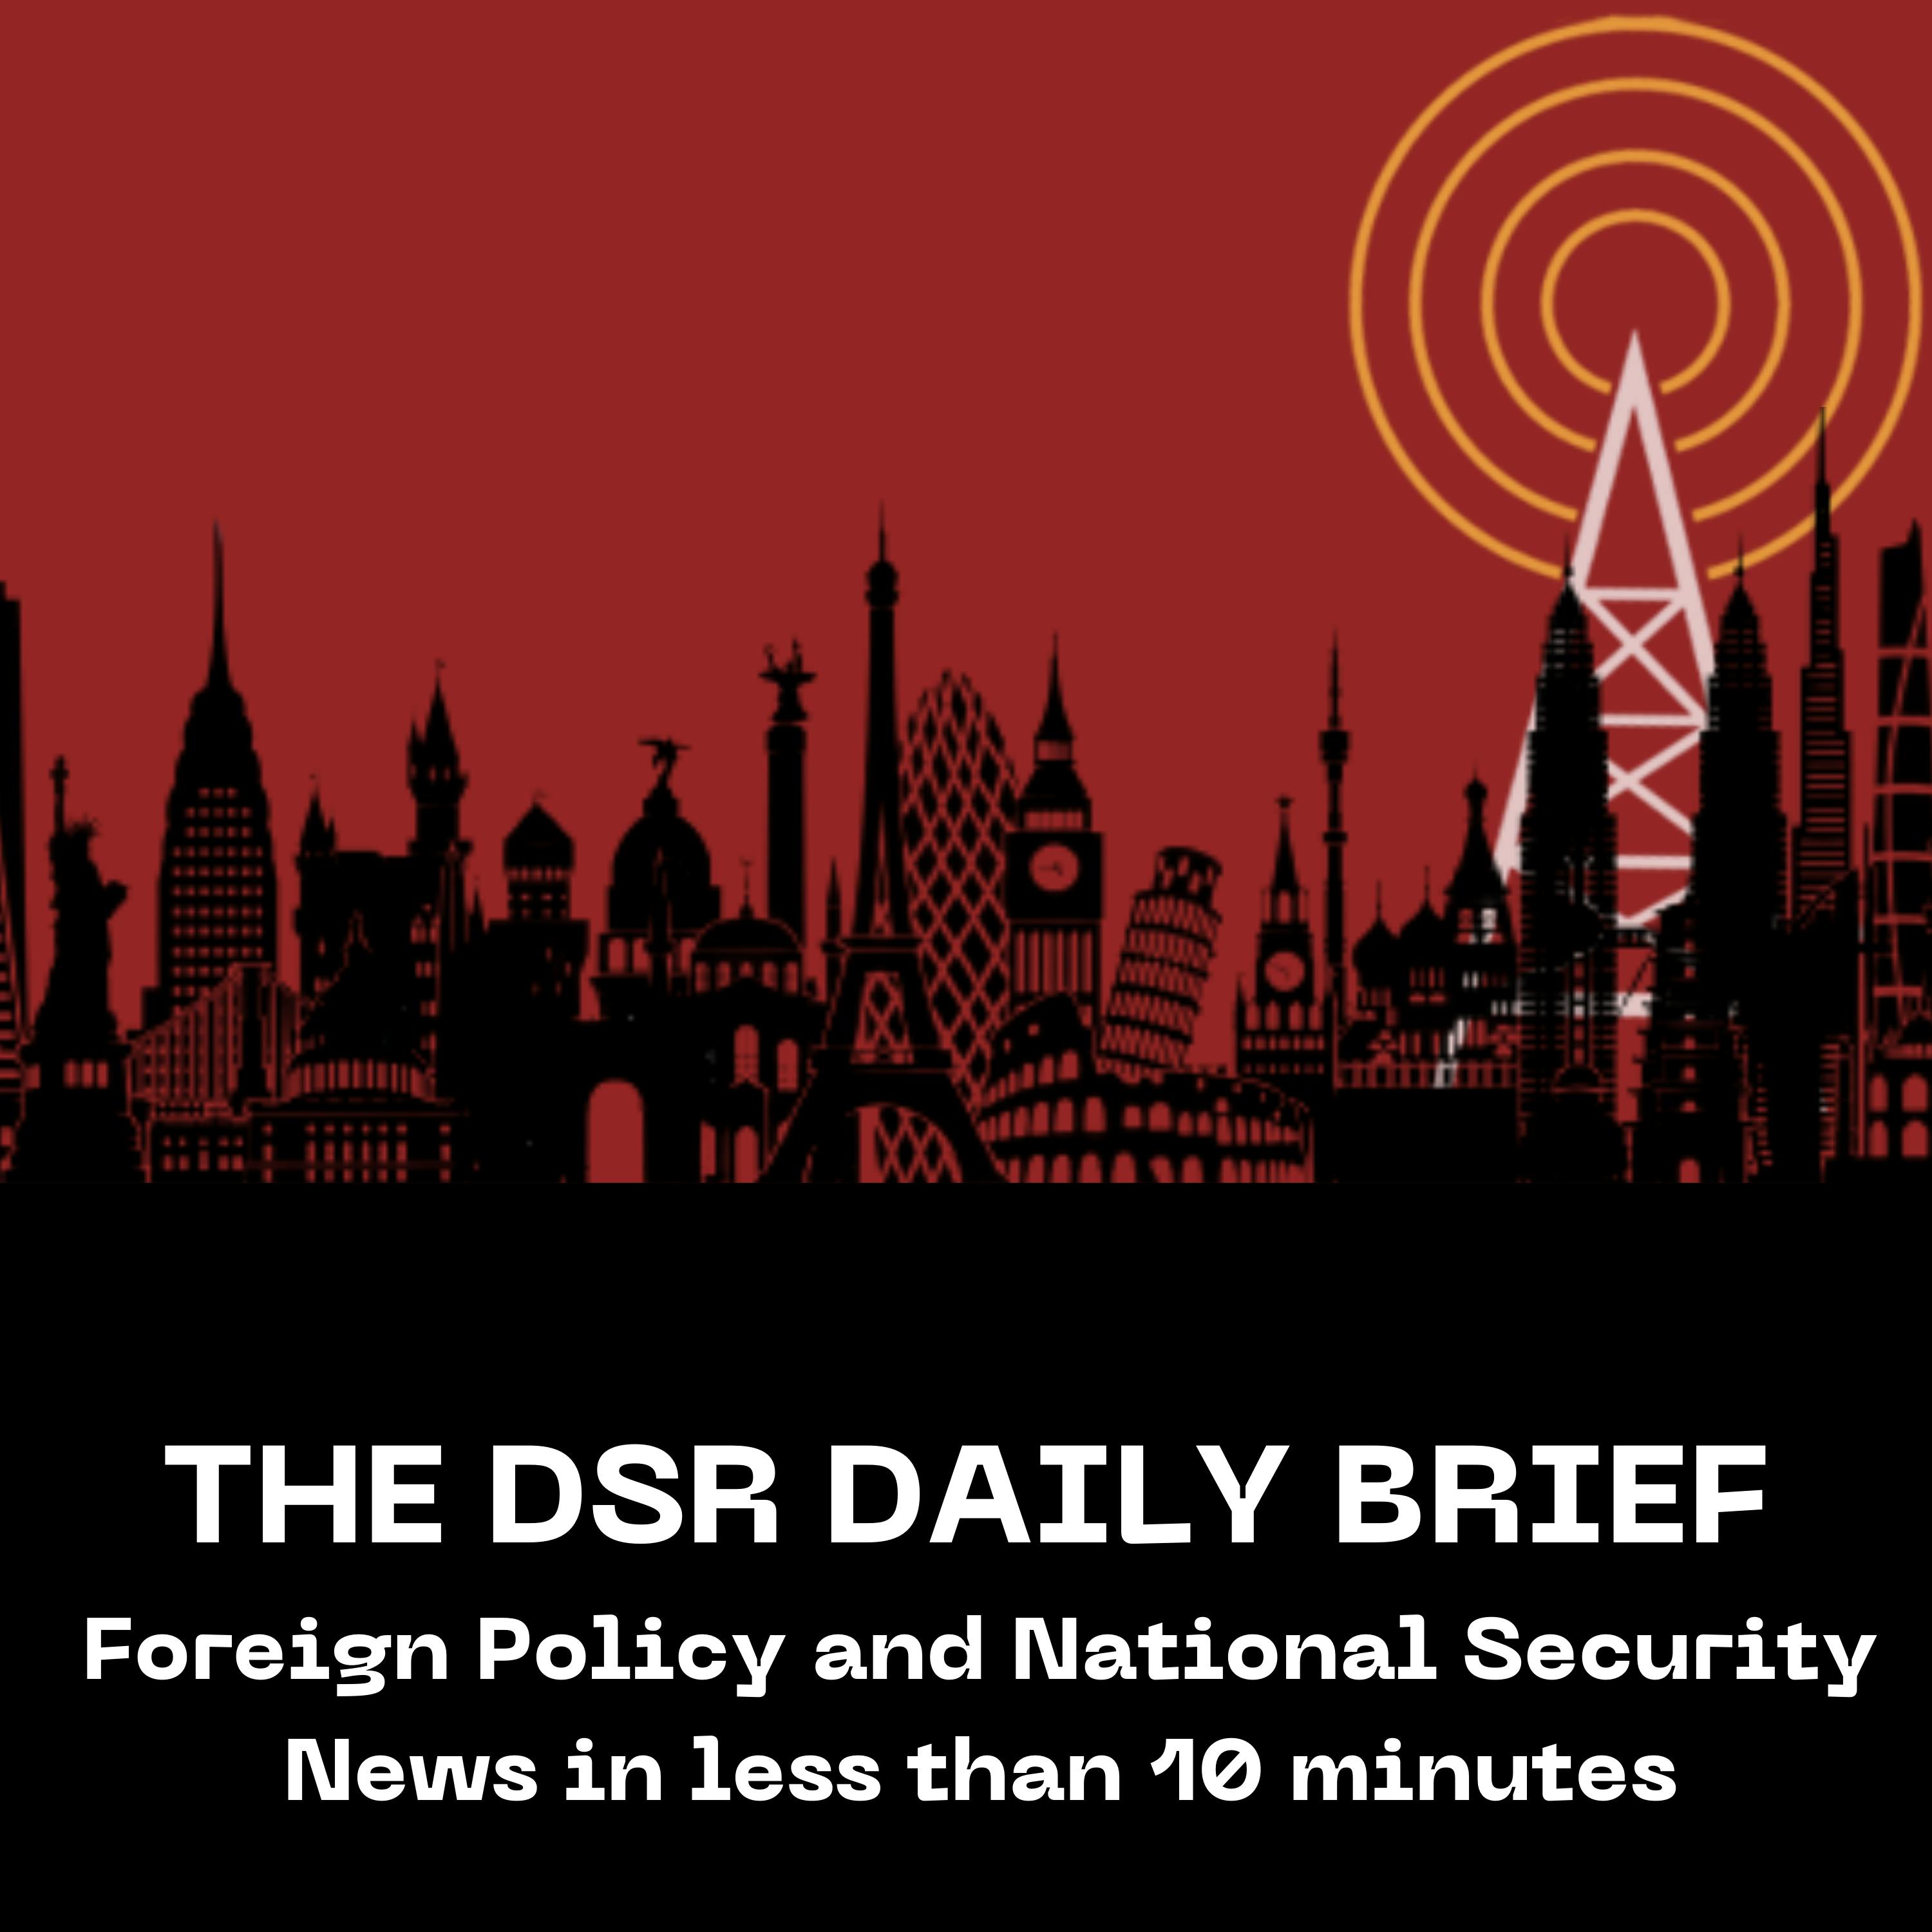 The DSR Daily for January 4 - Donald Trump Asks for Supreme Court Intervention in Colorado Case, Ukraine and Russia Engage in Prisoner Swap